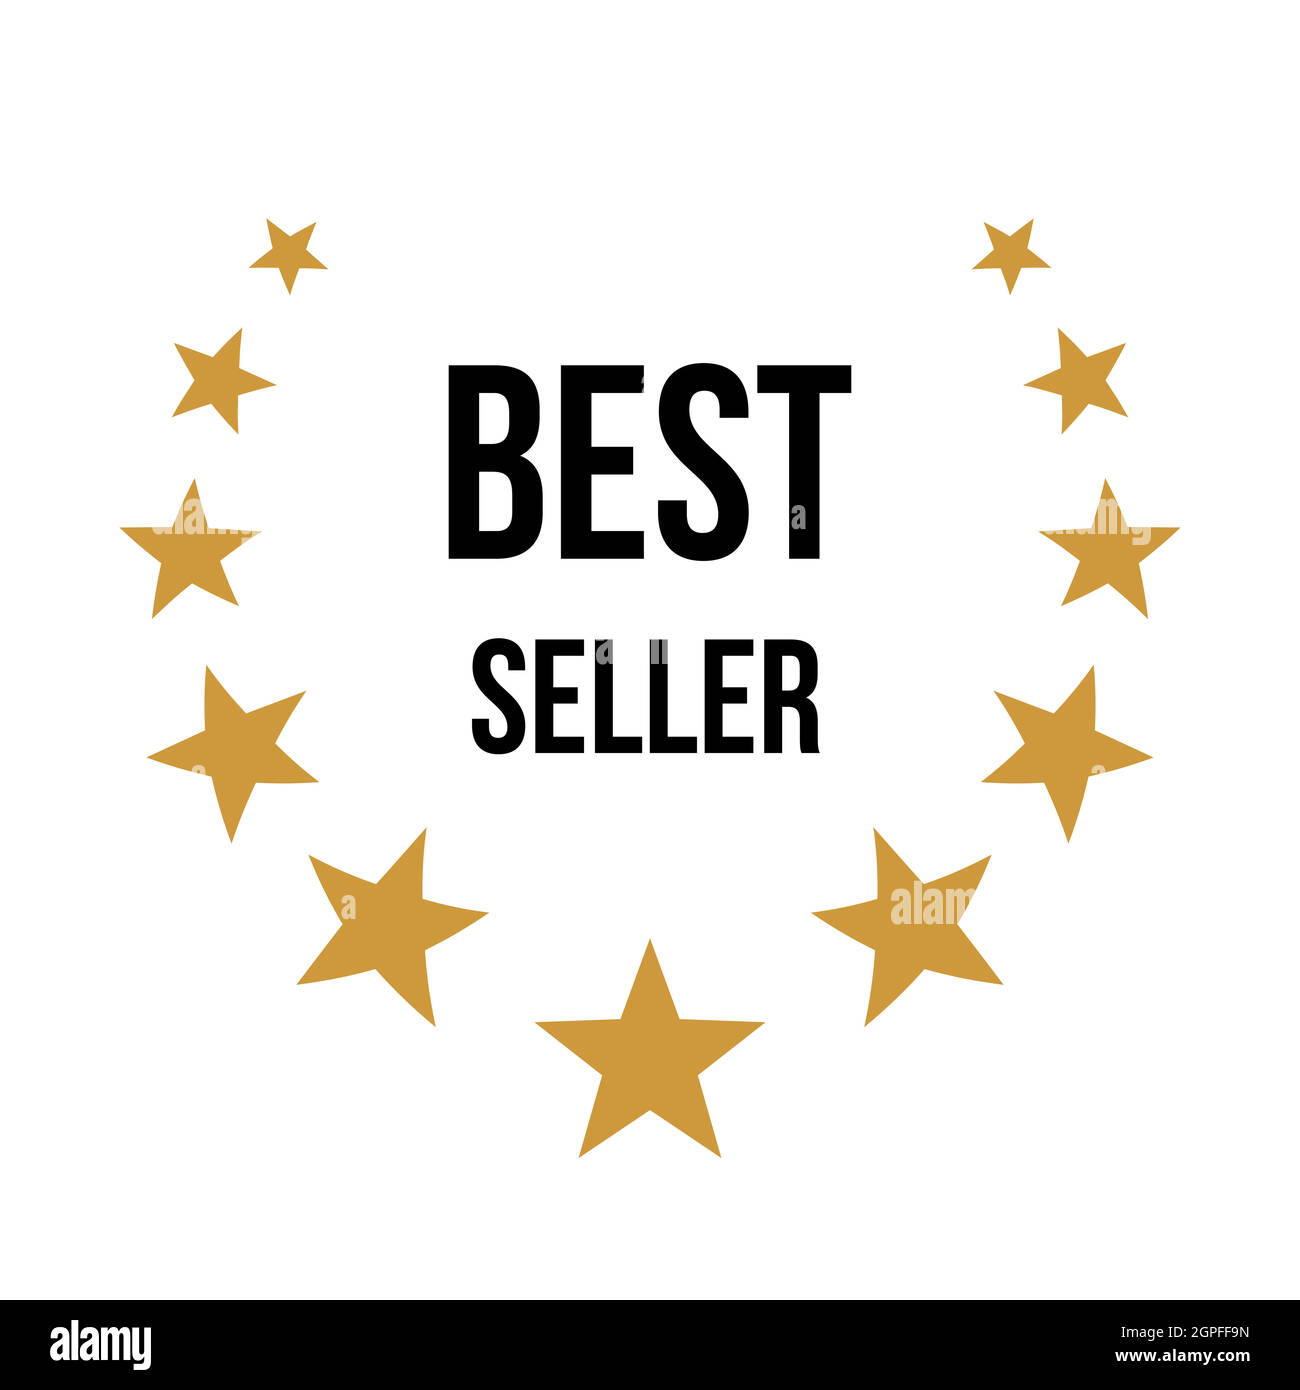 https://c8.alamy.com/comp/2GPFF9N/best-seller-icon-badge-vector-illustration-label-award-seal-stamp-with-gold-stars-and-best-seller-text-quality-tag-for-top-premium-product-or-specia-2GPFF9N.jpg